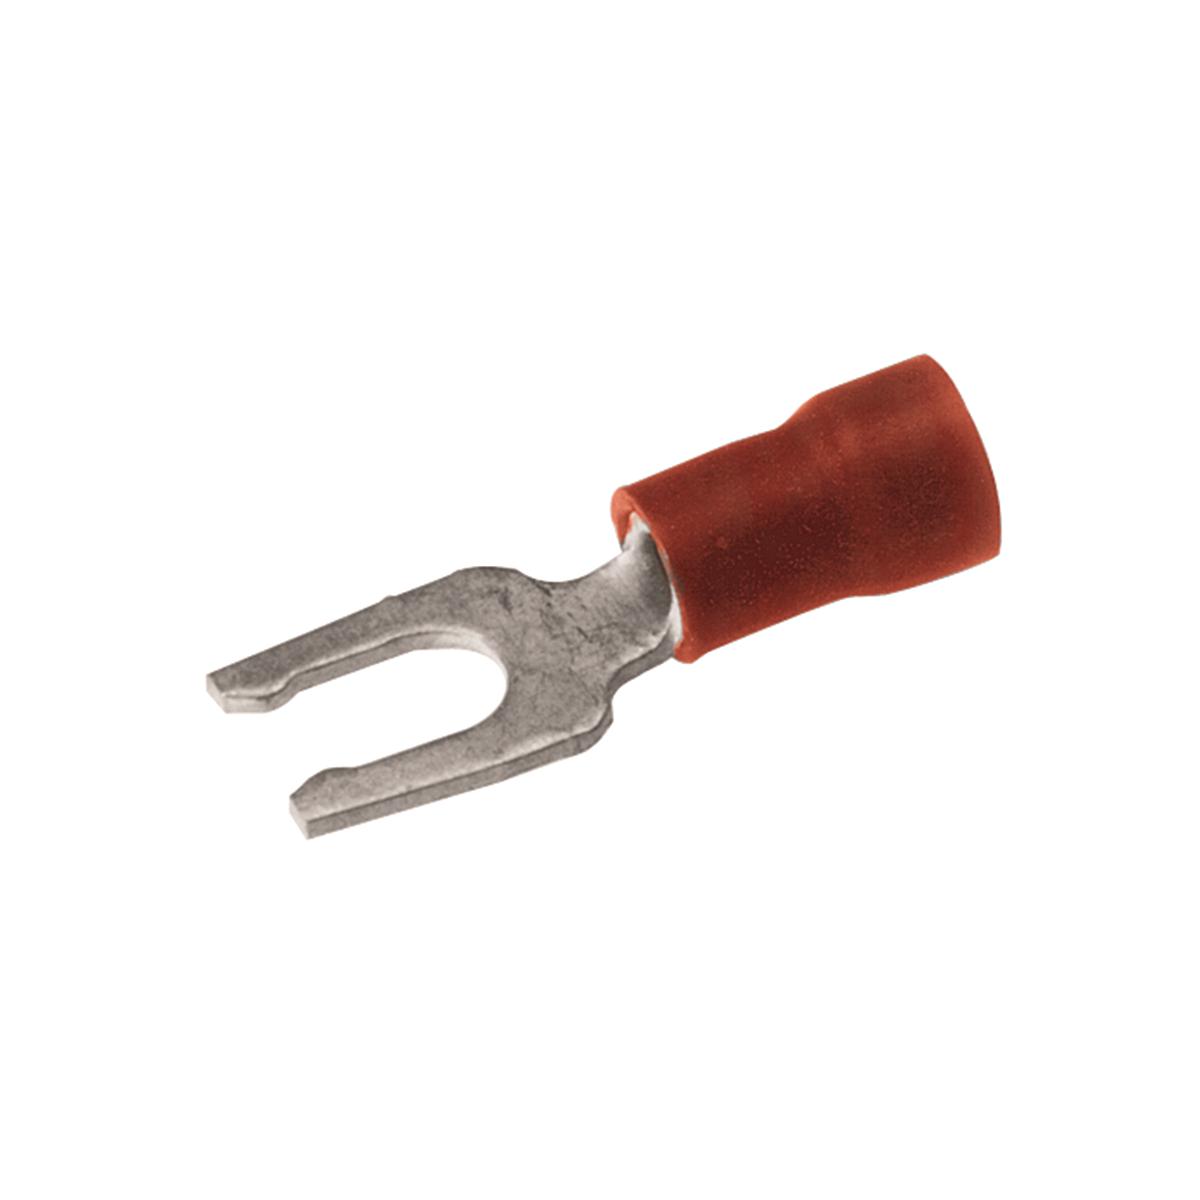 Hubbell BA16EL8 Vinyl Locking Fork Terminal For 22 - 16 AWG.  ; Features: Locking Fork Tongue Design: Allows Fast Installation-Screw Only Has To Be Loosened For Termination, Internal Configuration Of The Fork: Prevents The Terminal From Coming Off The Screw Without Apply